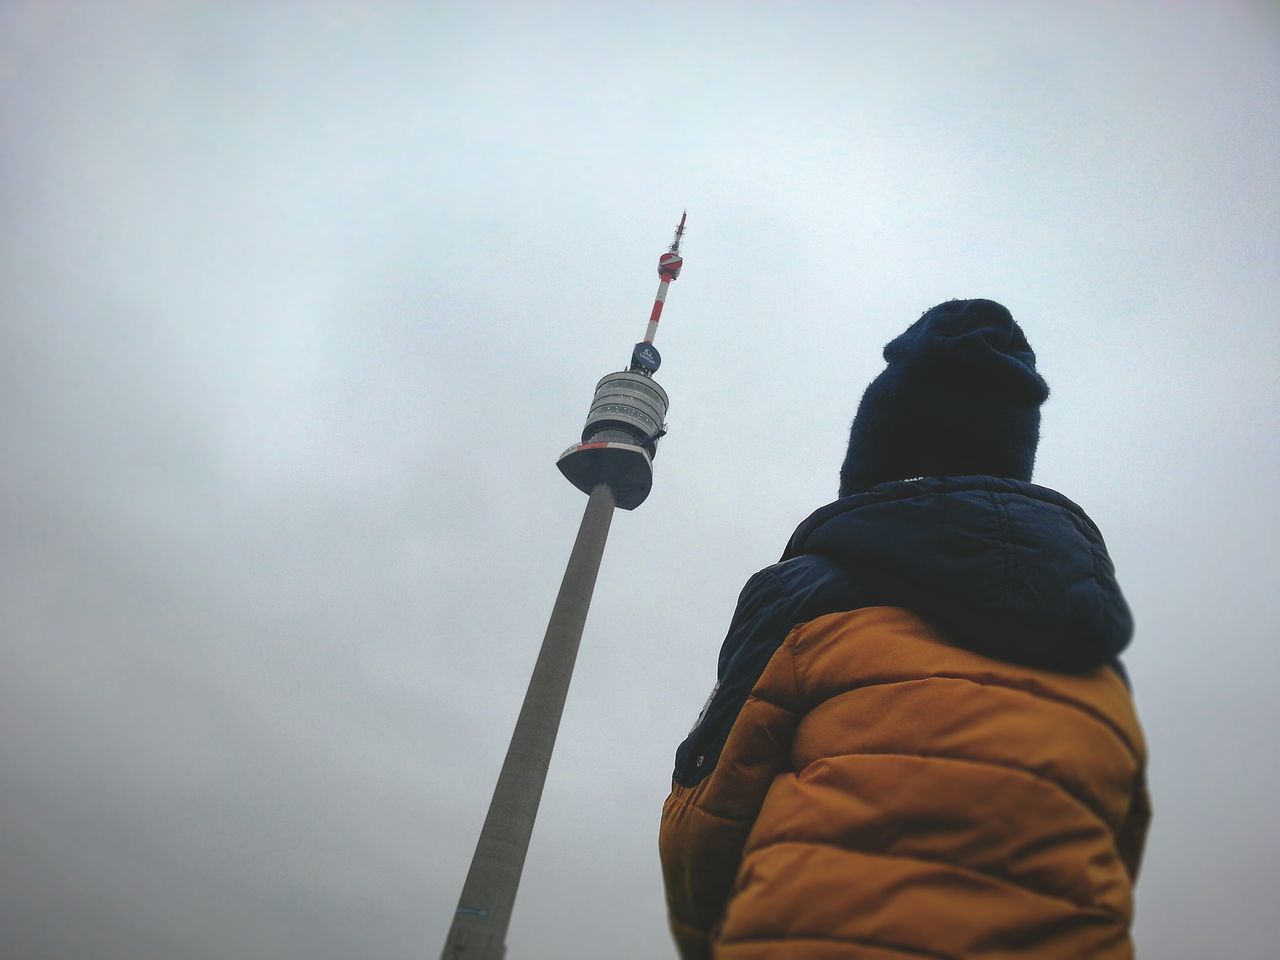 tower, sky, communication, winter, cloud - sky, outdoors, low angle view, one person, travel destinations, city, cold temperature, people, day, adult, adults only